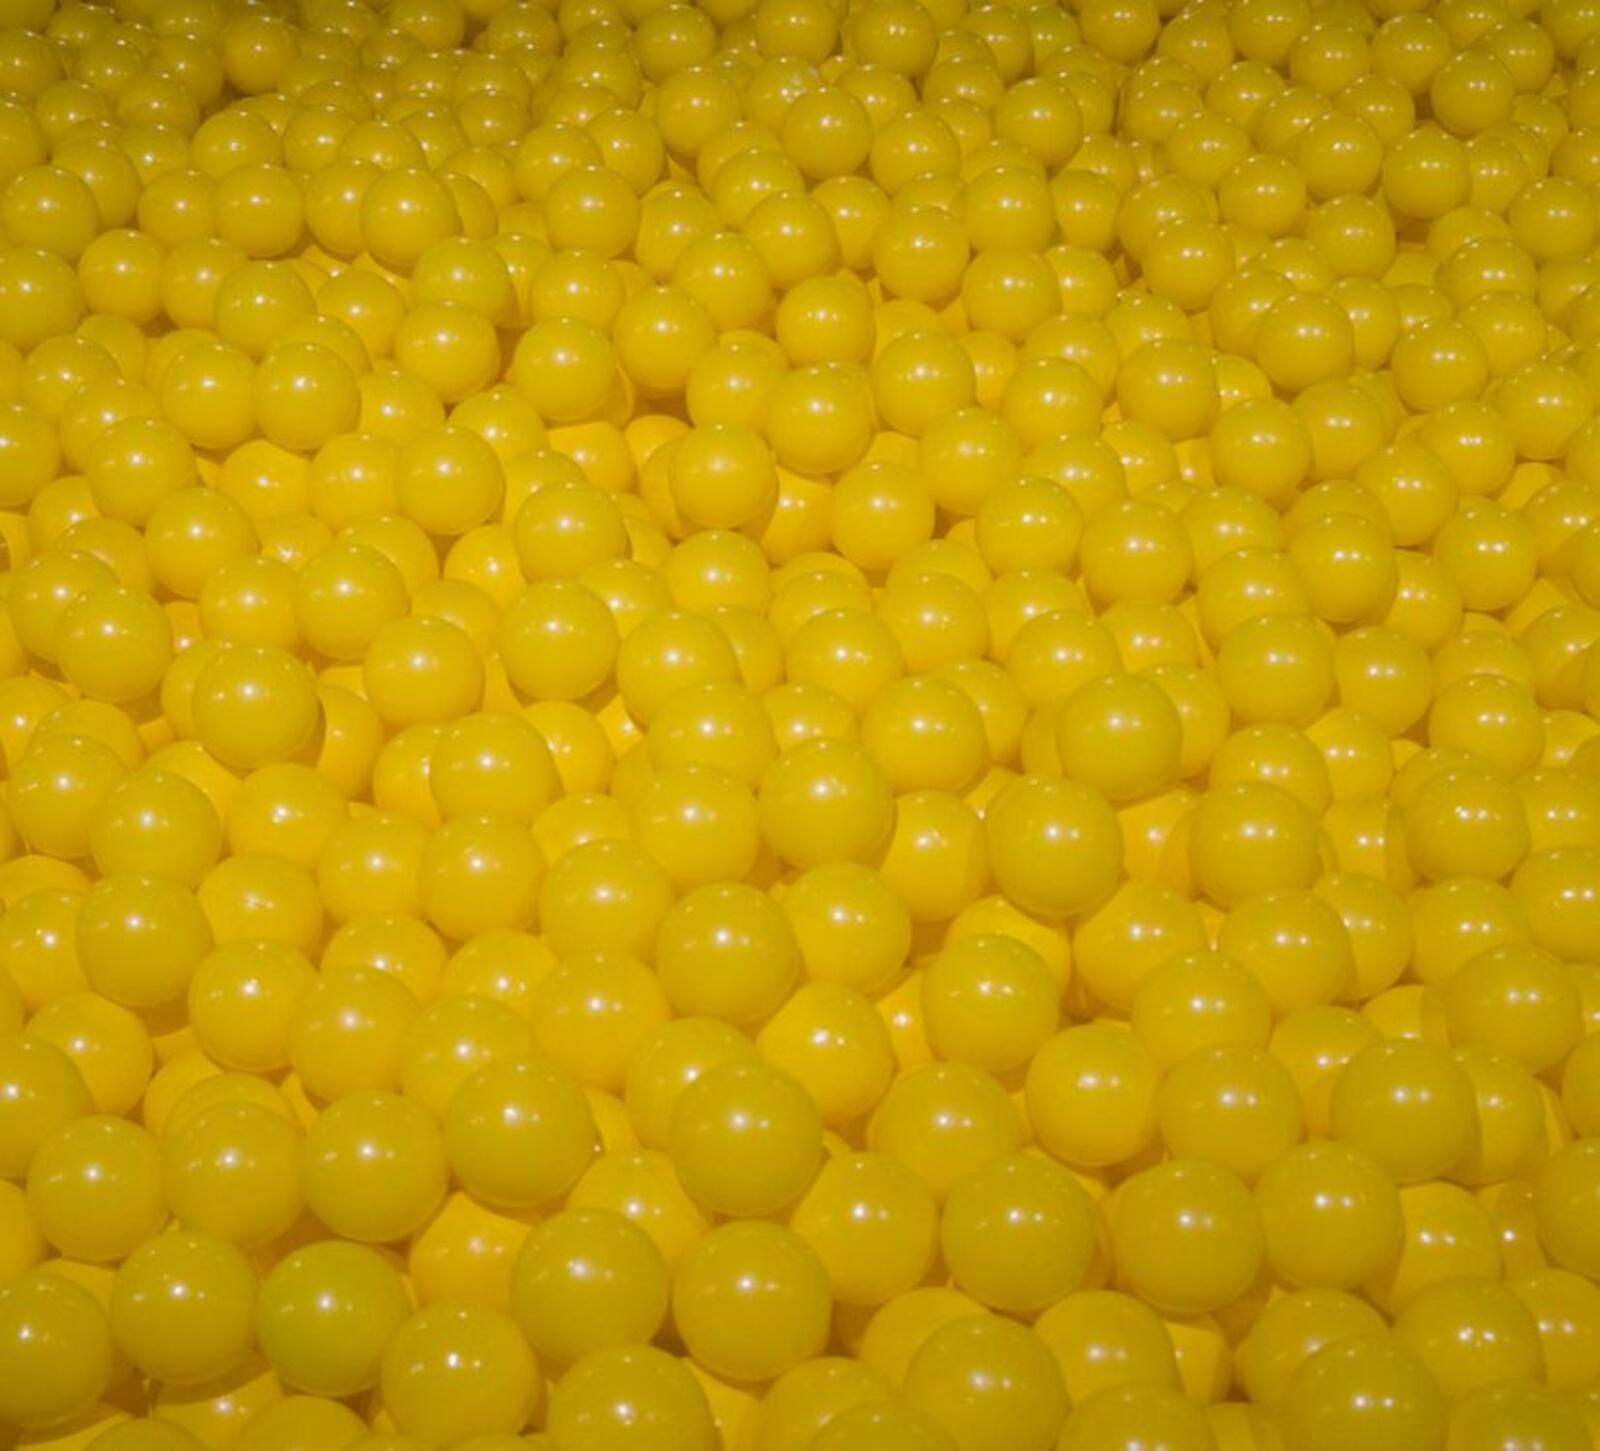 Wallpapers balls yellow shapes on the desktop